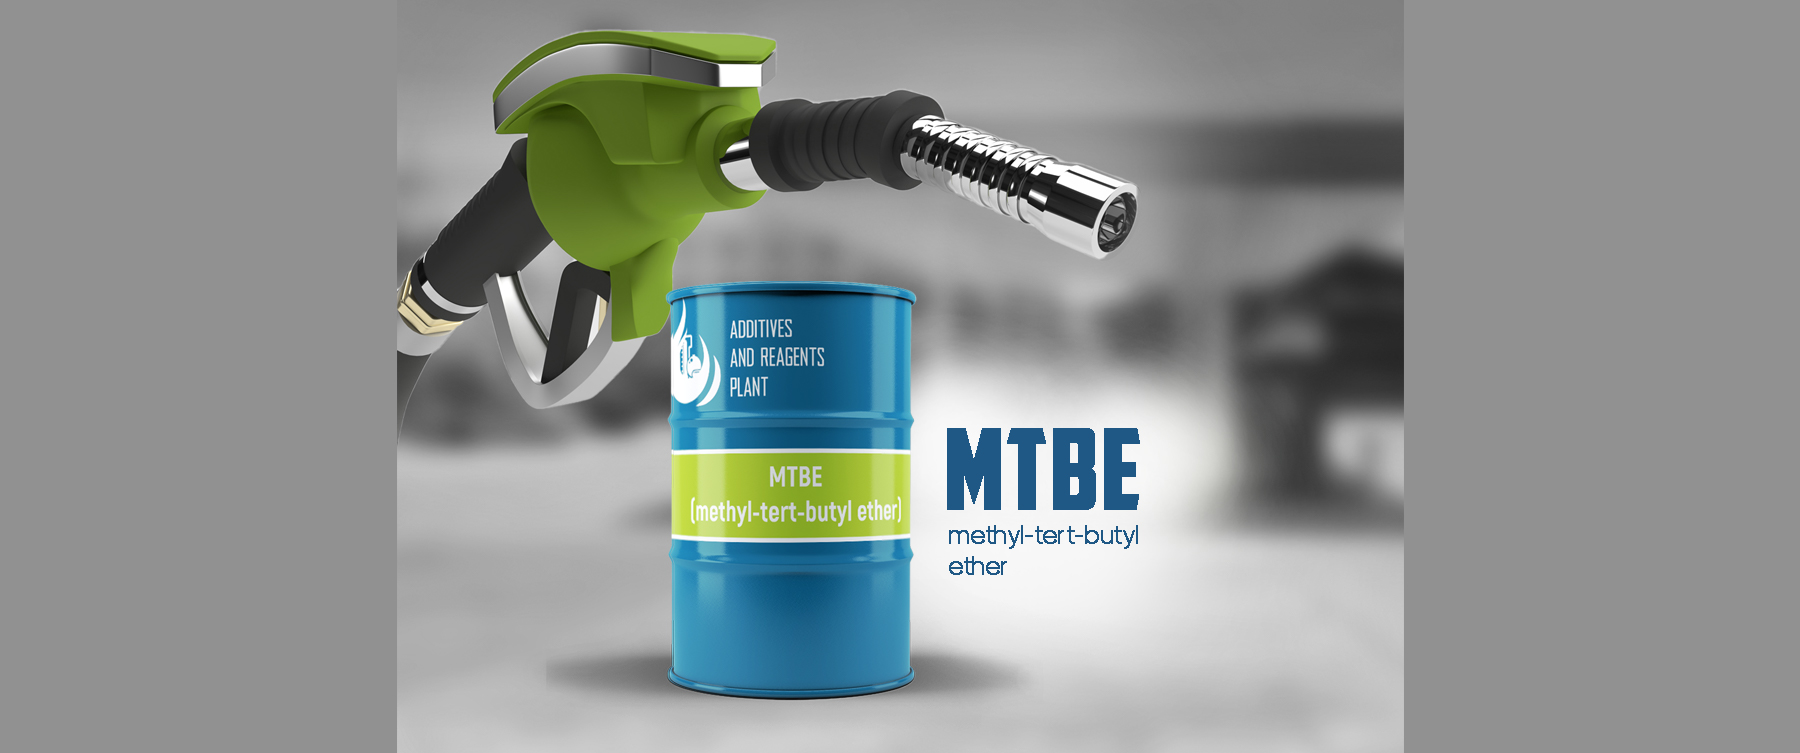 MTBE IS AN ANTIKNOCK ADDITIVE FOR GASOLINE